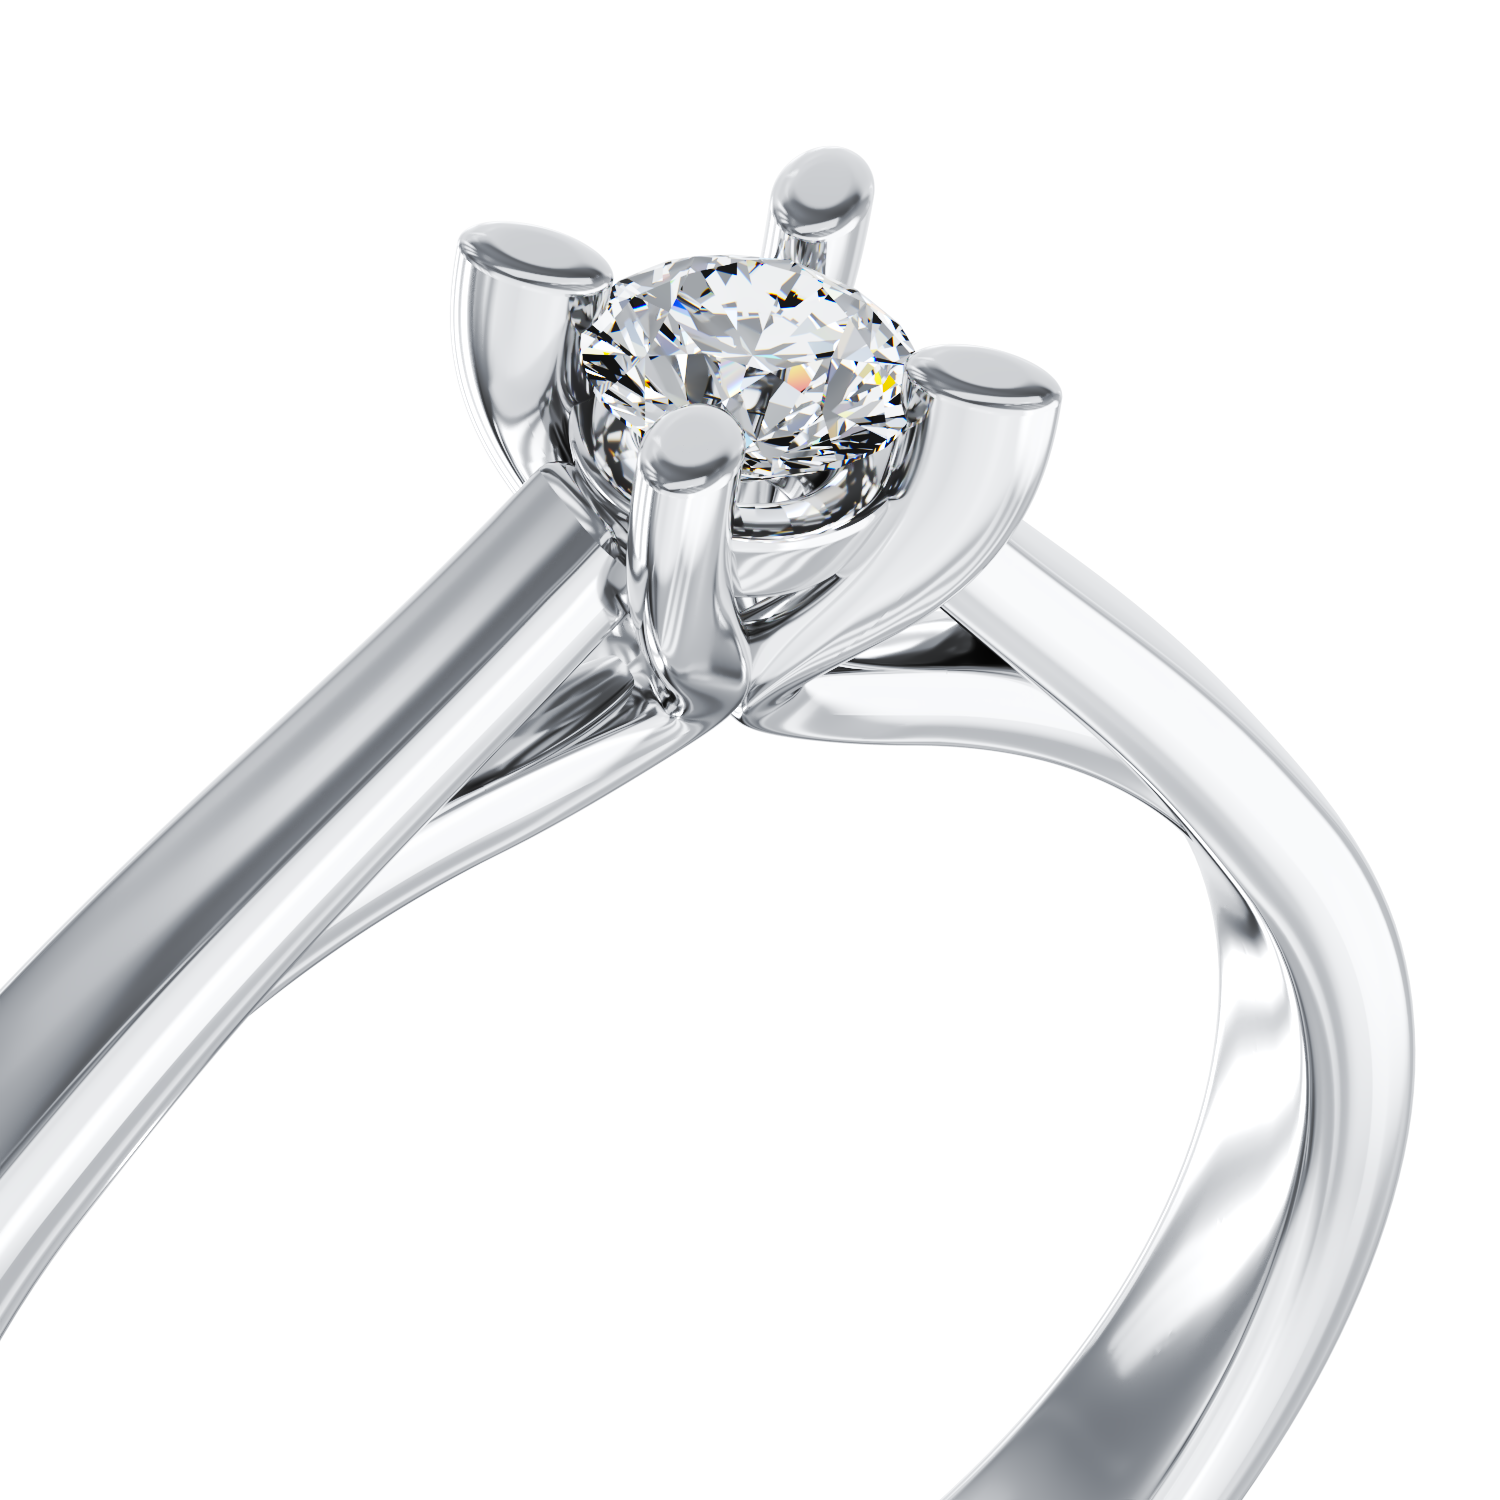 14K white gold engagement ring with a 0.10ct solitaire diamond